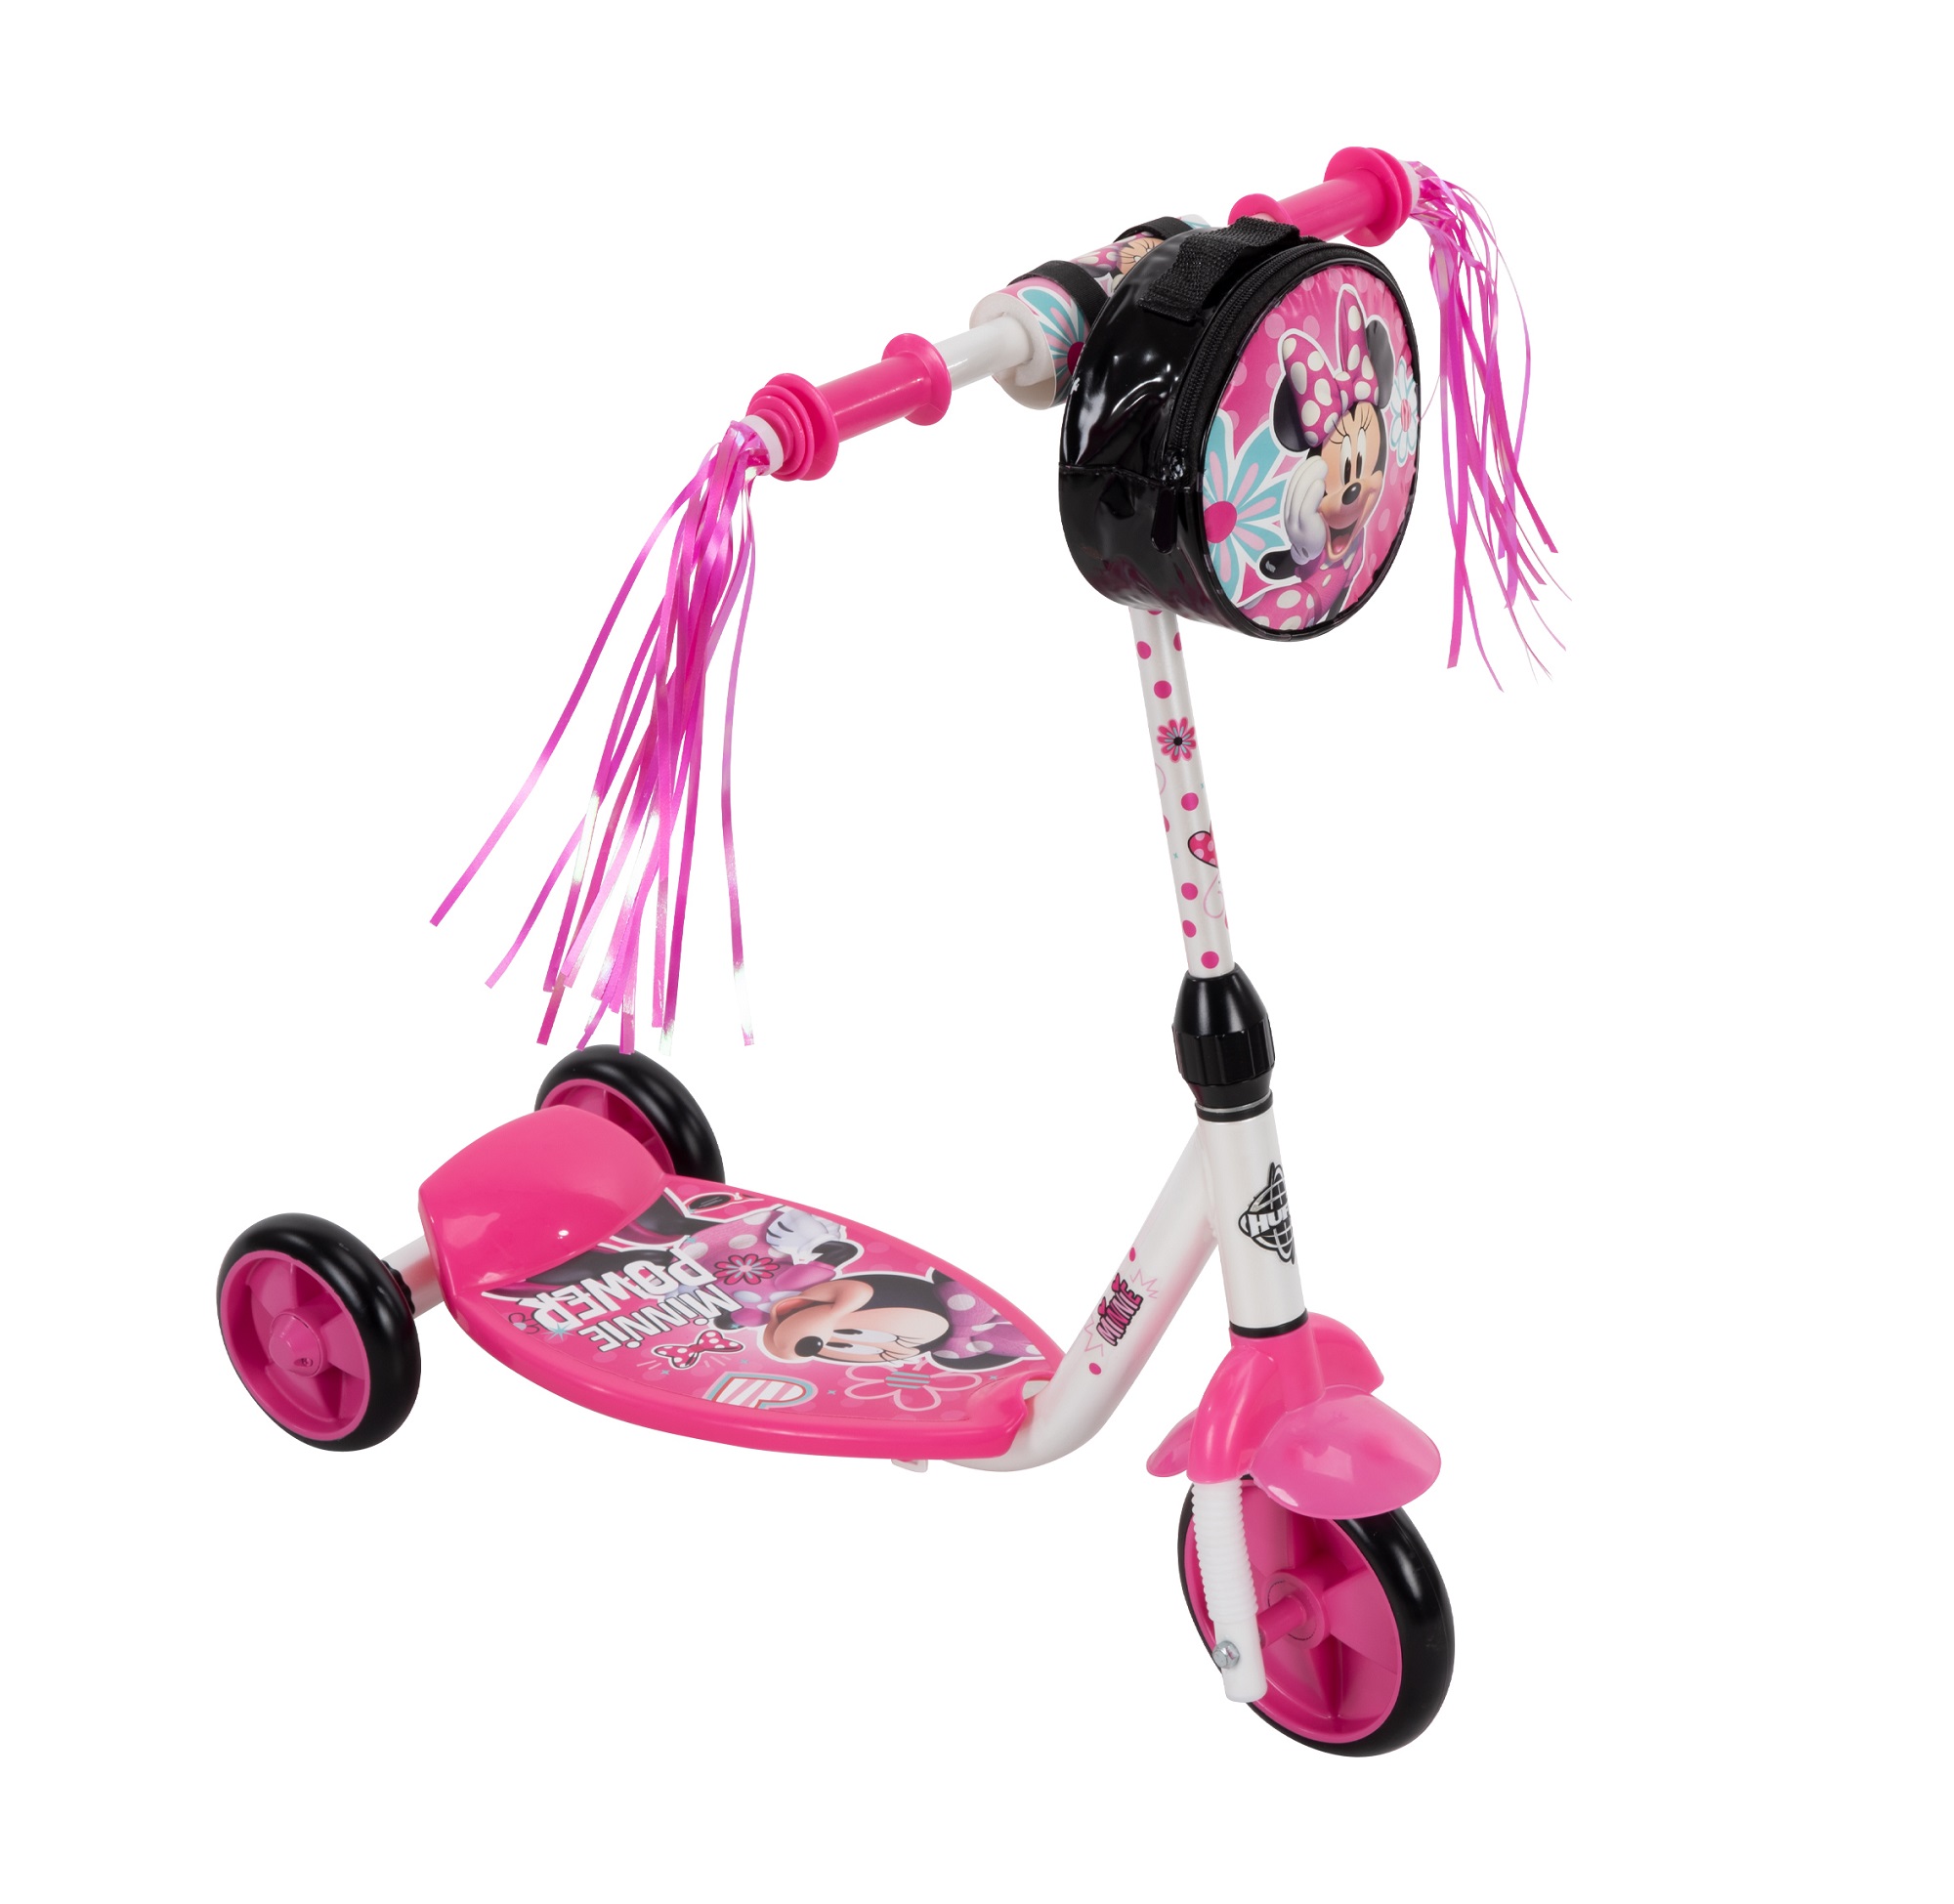 Disney Minnie 3 Wheel Preschool Scooter for Girls by Huffy - image 1 of 5